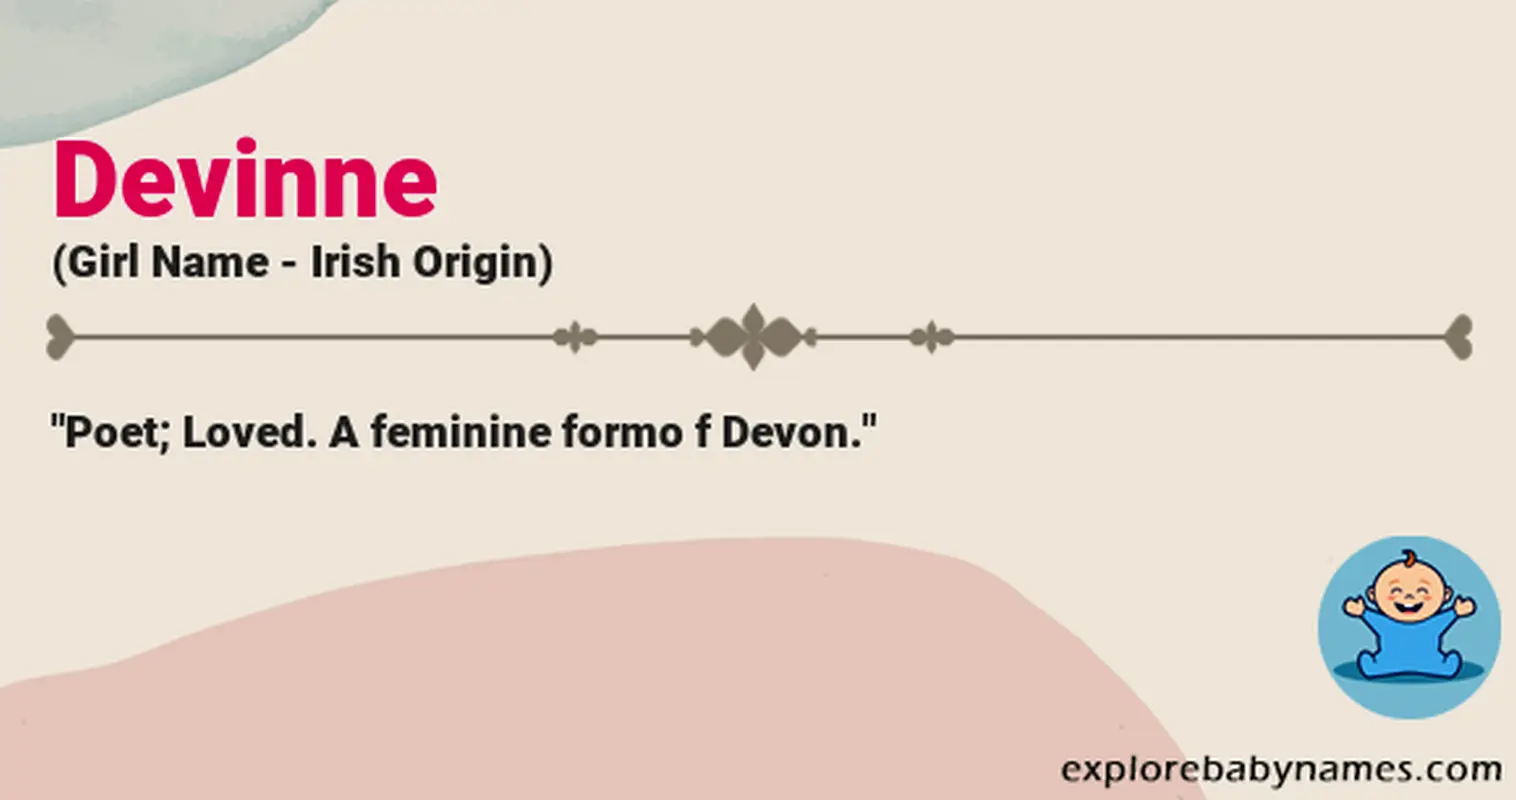 Meaning of Devinne